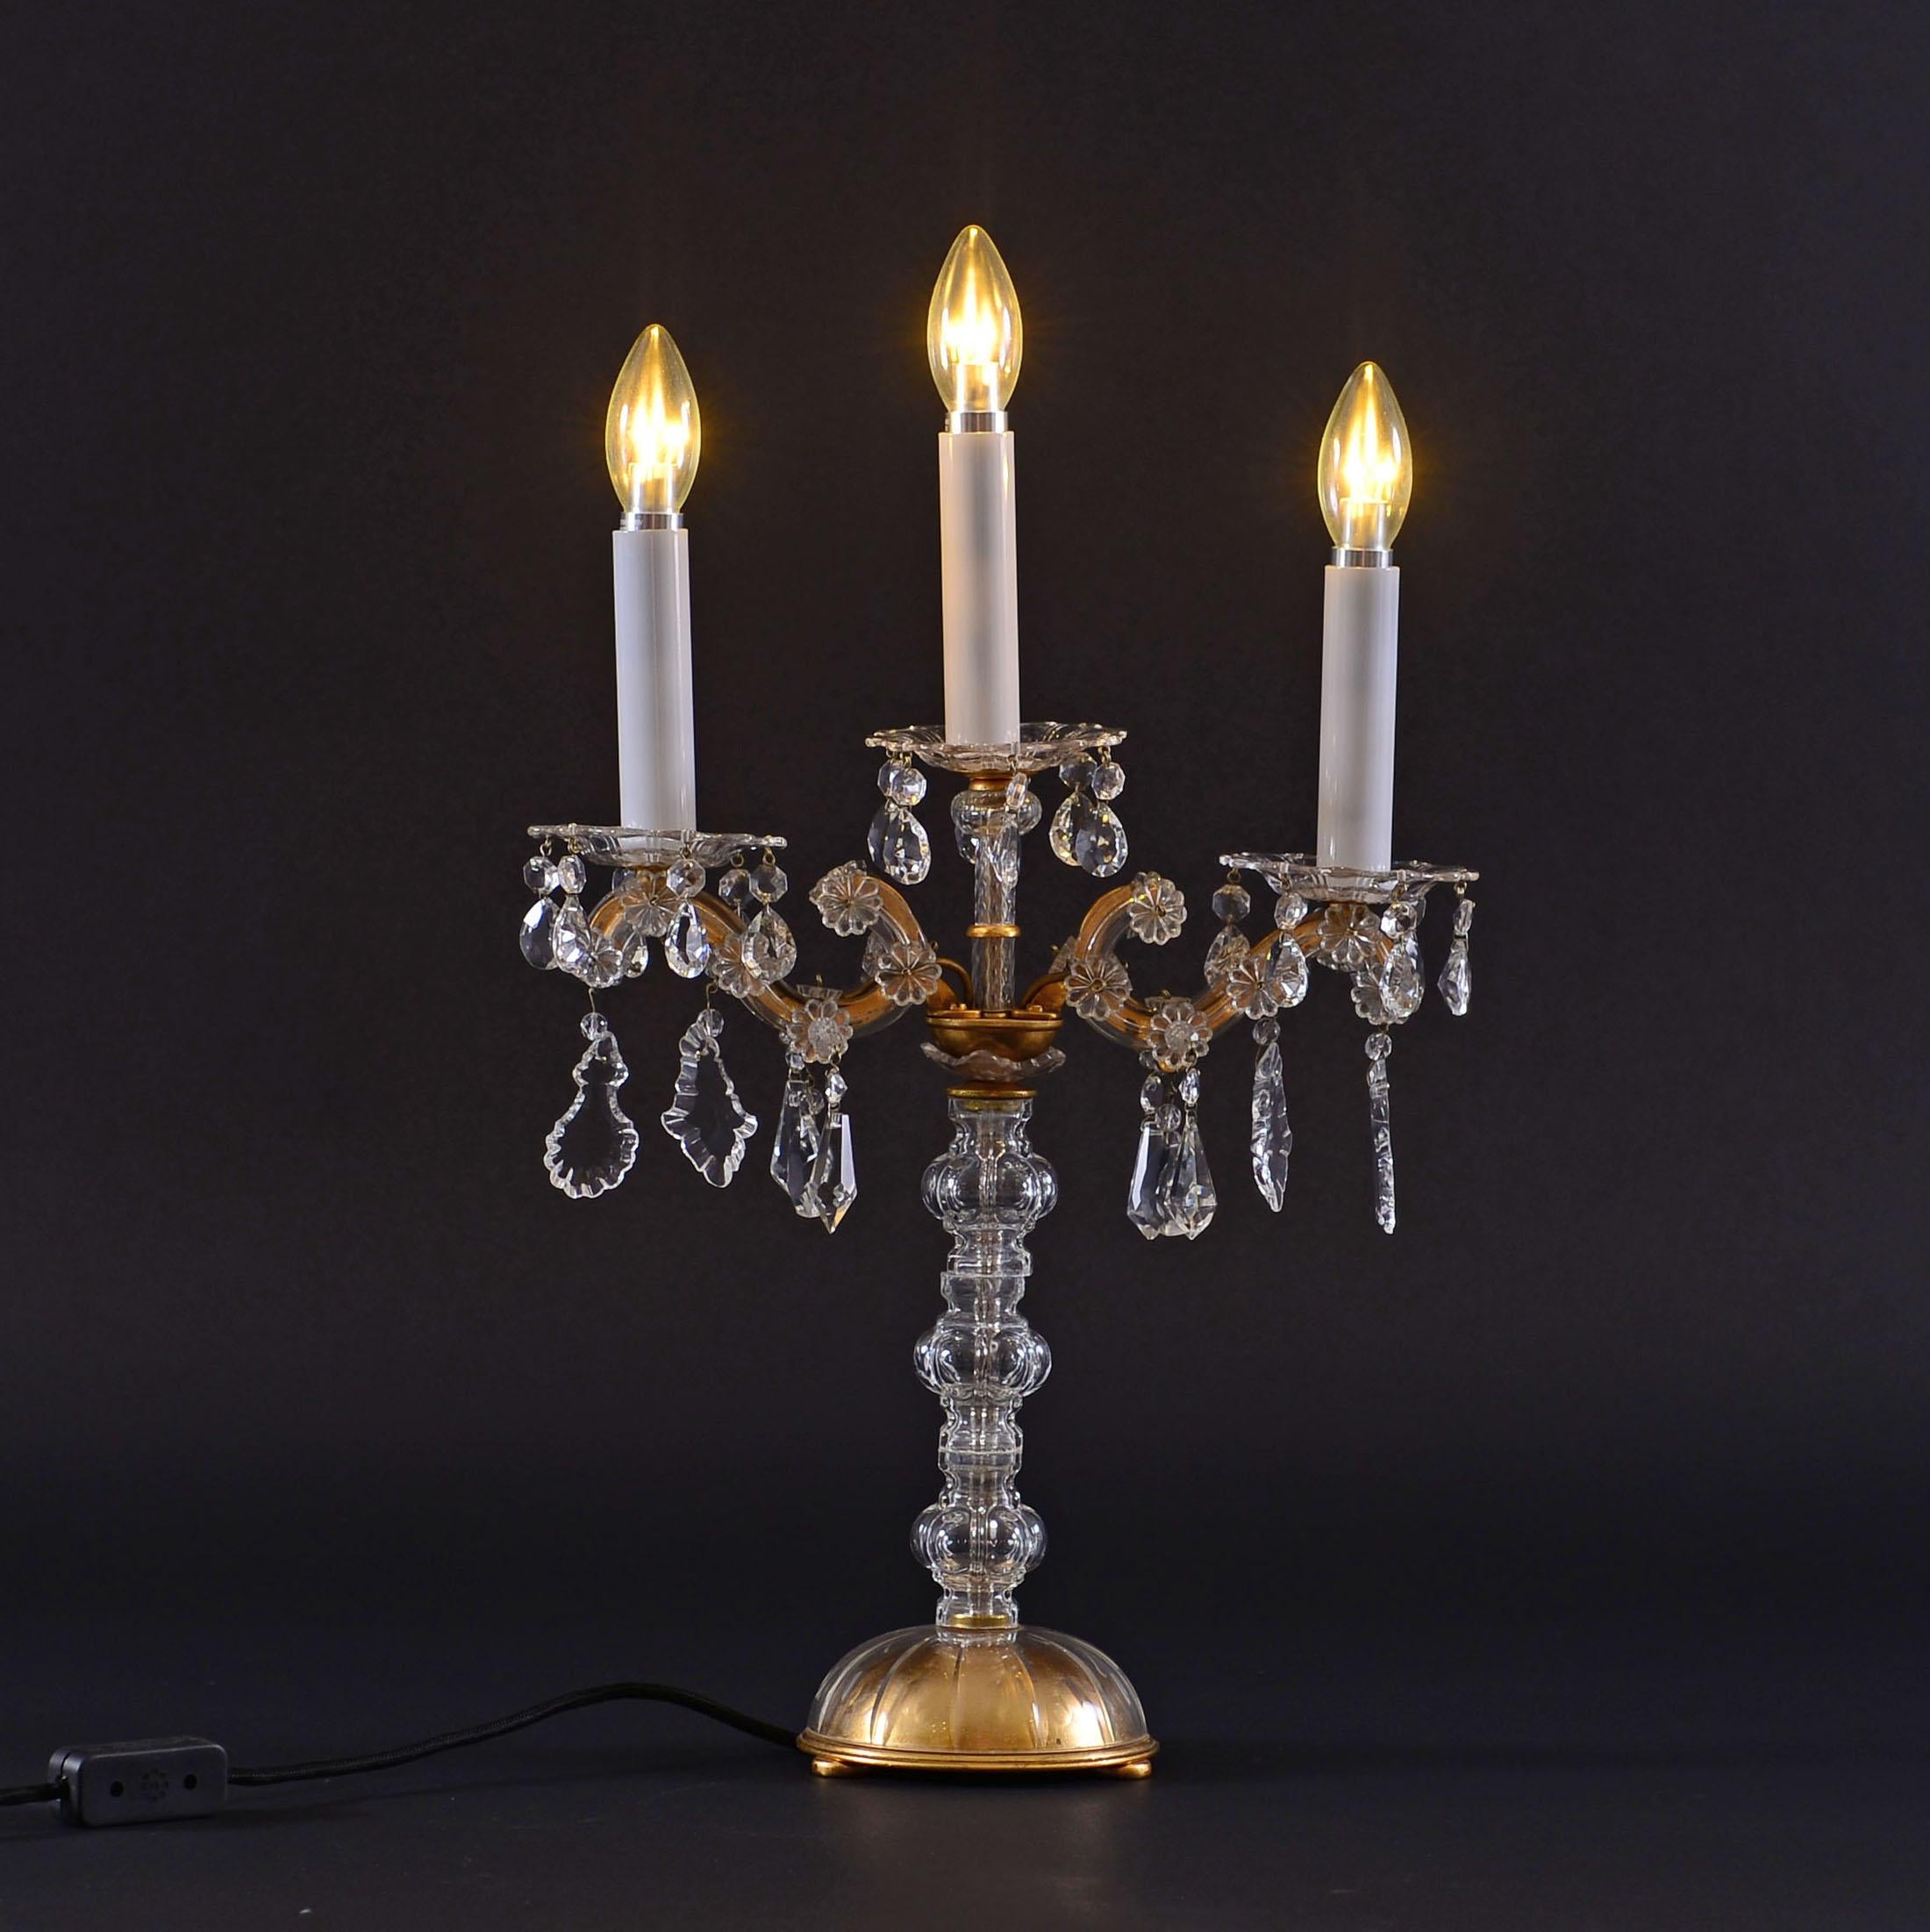 Austrian  Baroque style Maria Theresia Table Light Candelabra 20th Century Original 1920  For Sale